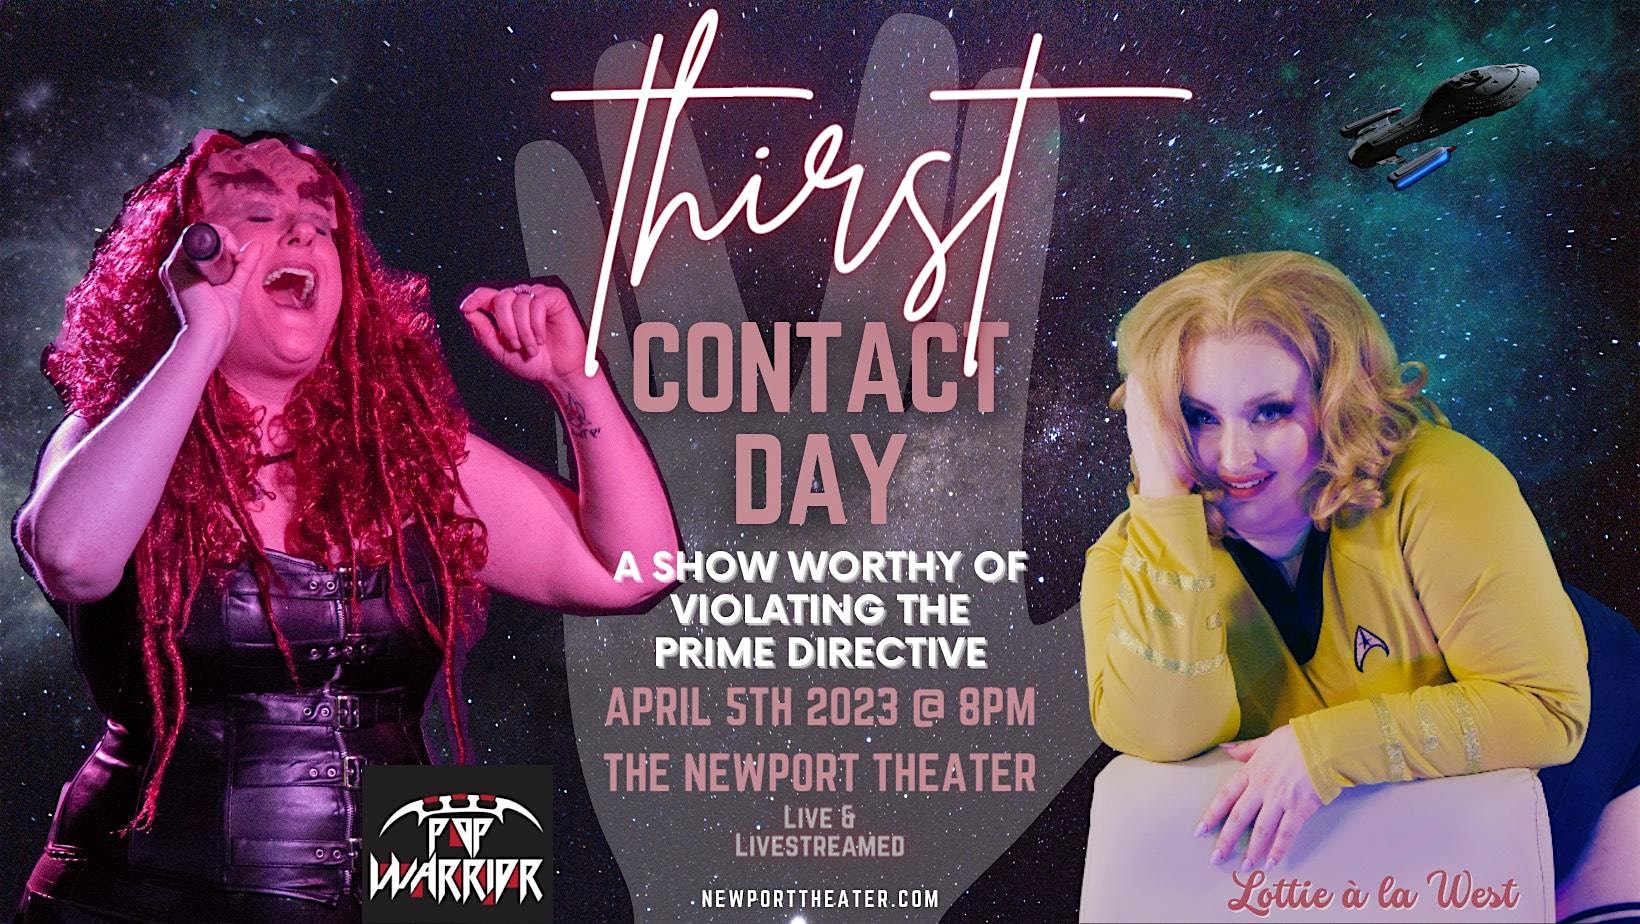 Thirst Contact Day: A Show Worthy of Violating The Prime Directive